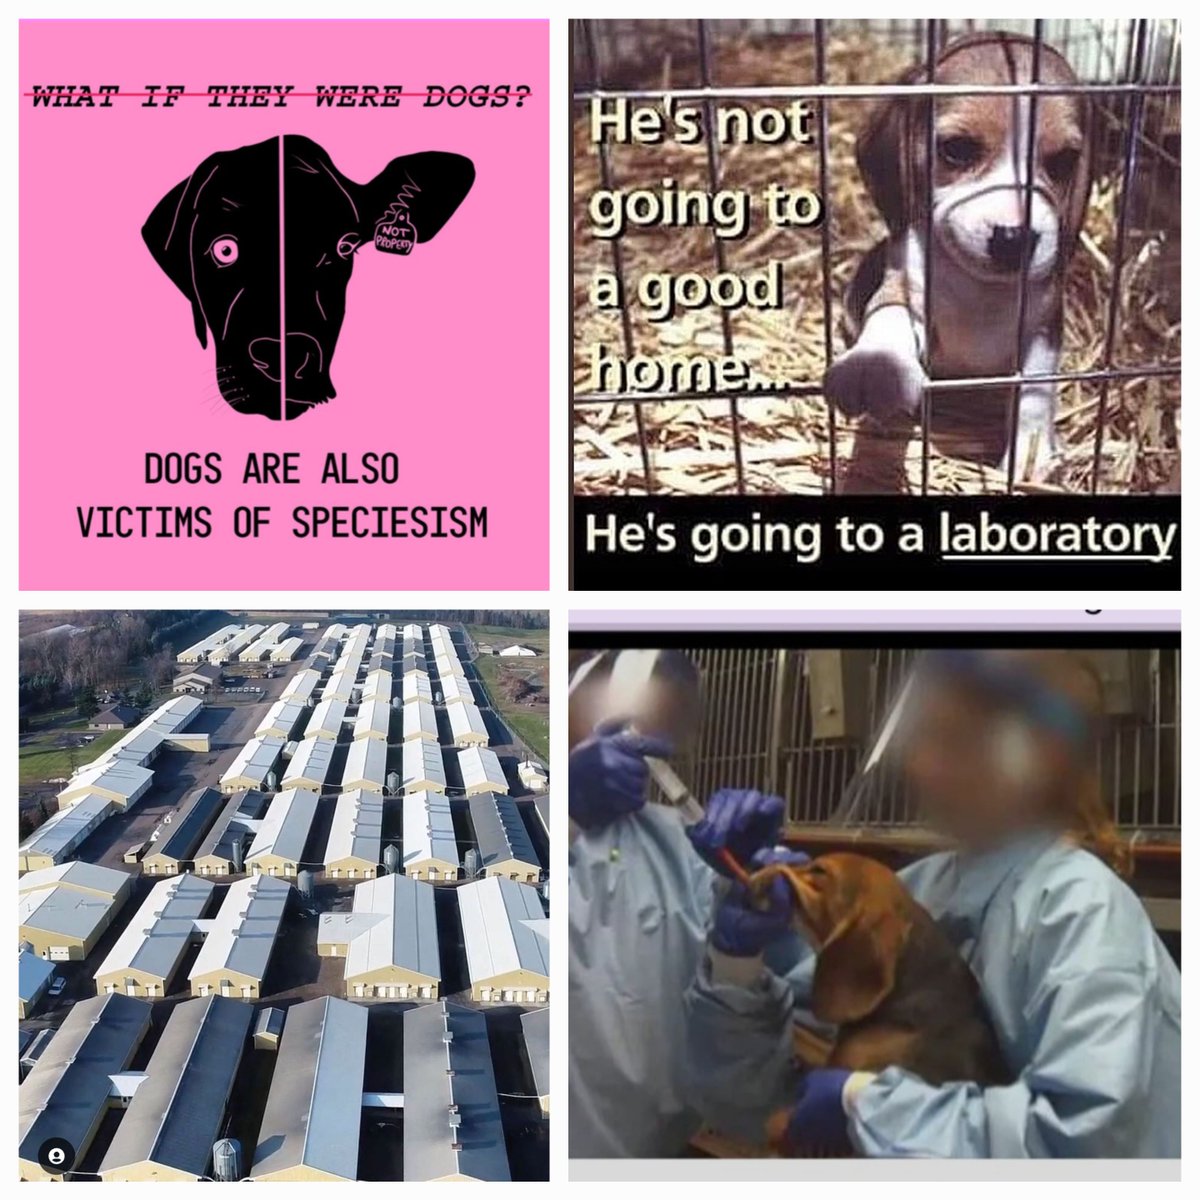 @Patrici04278024 @ChiweenieT14381 #Antispeciesism means trying to avoid and remedy all the different ways animals are discriminated against. Discrimination includes helping some animals and neglecting others. The largest group of neglected beings are animals in laboratories.